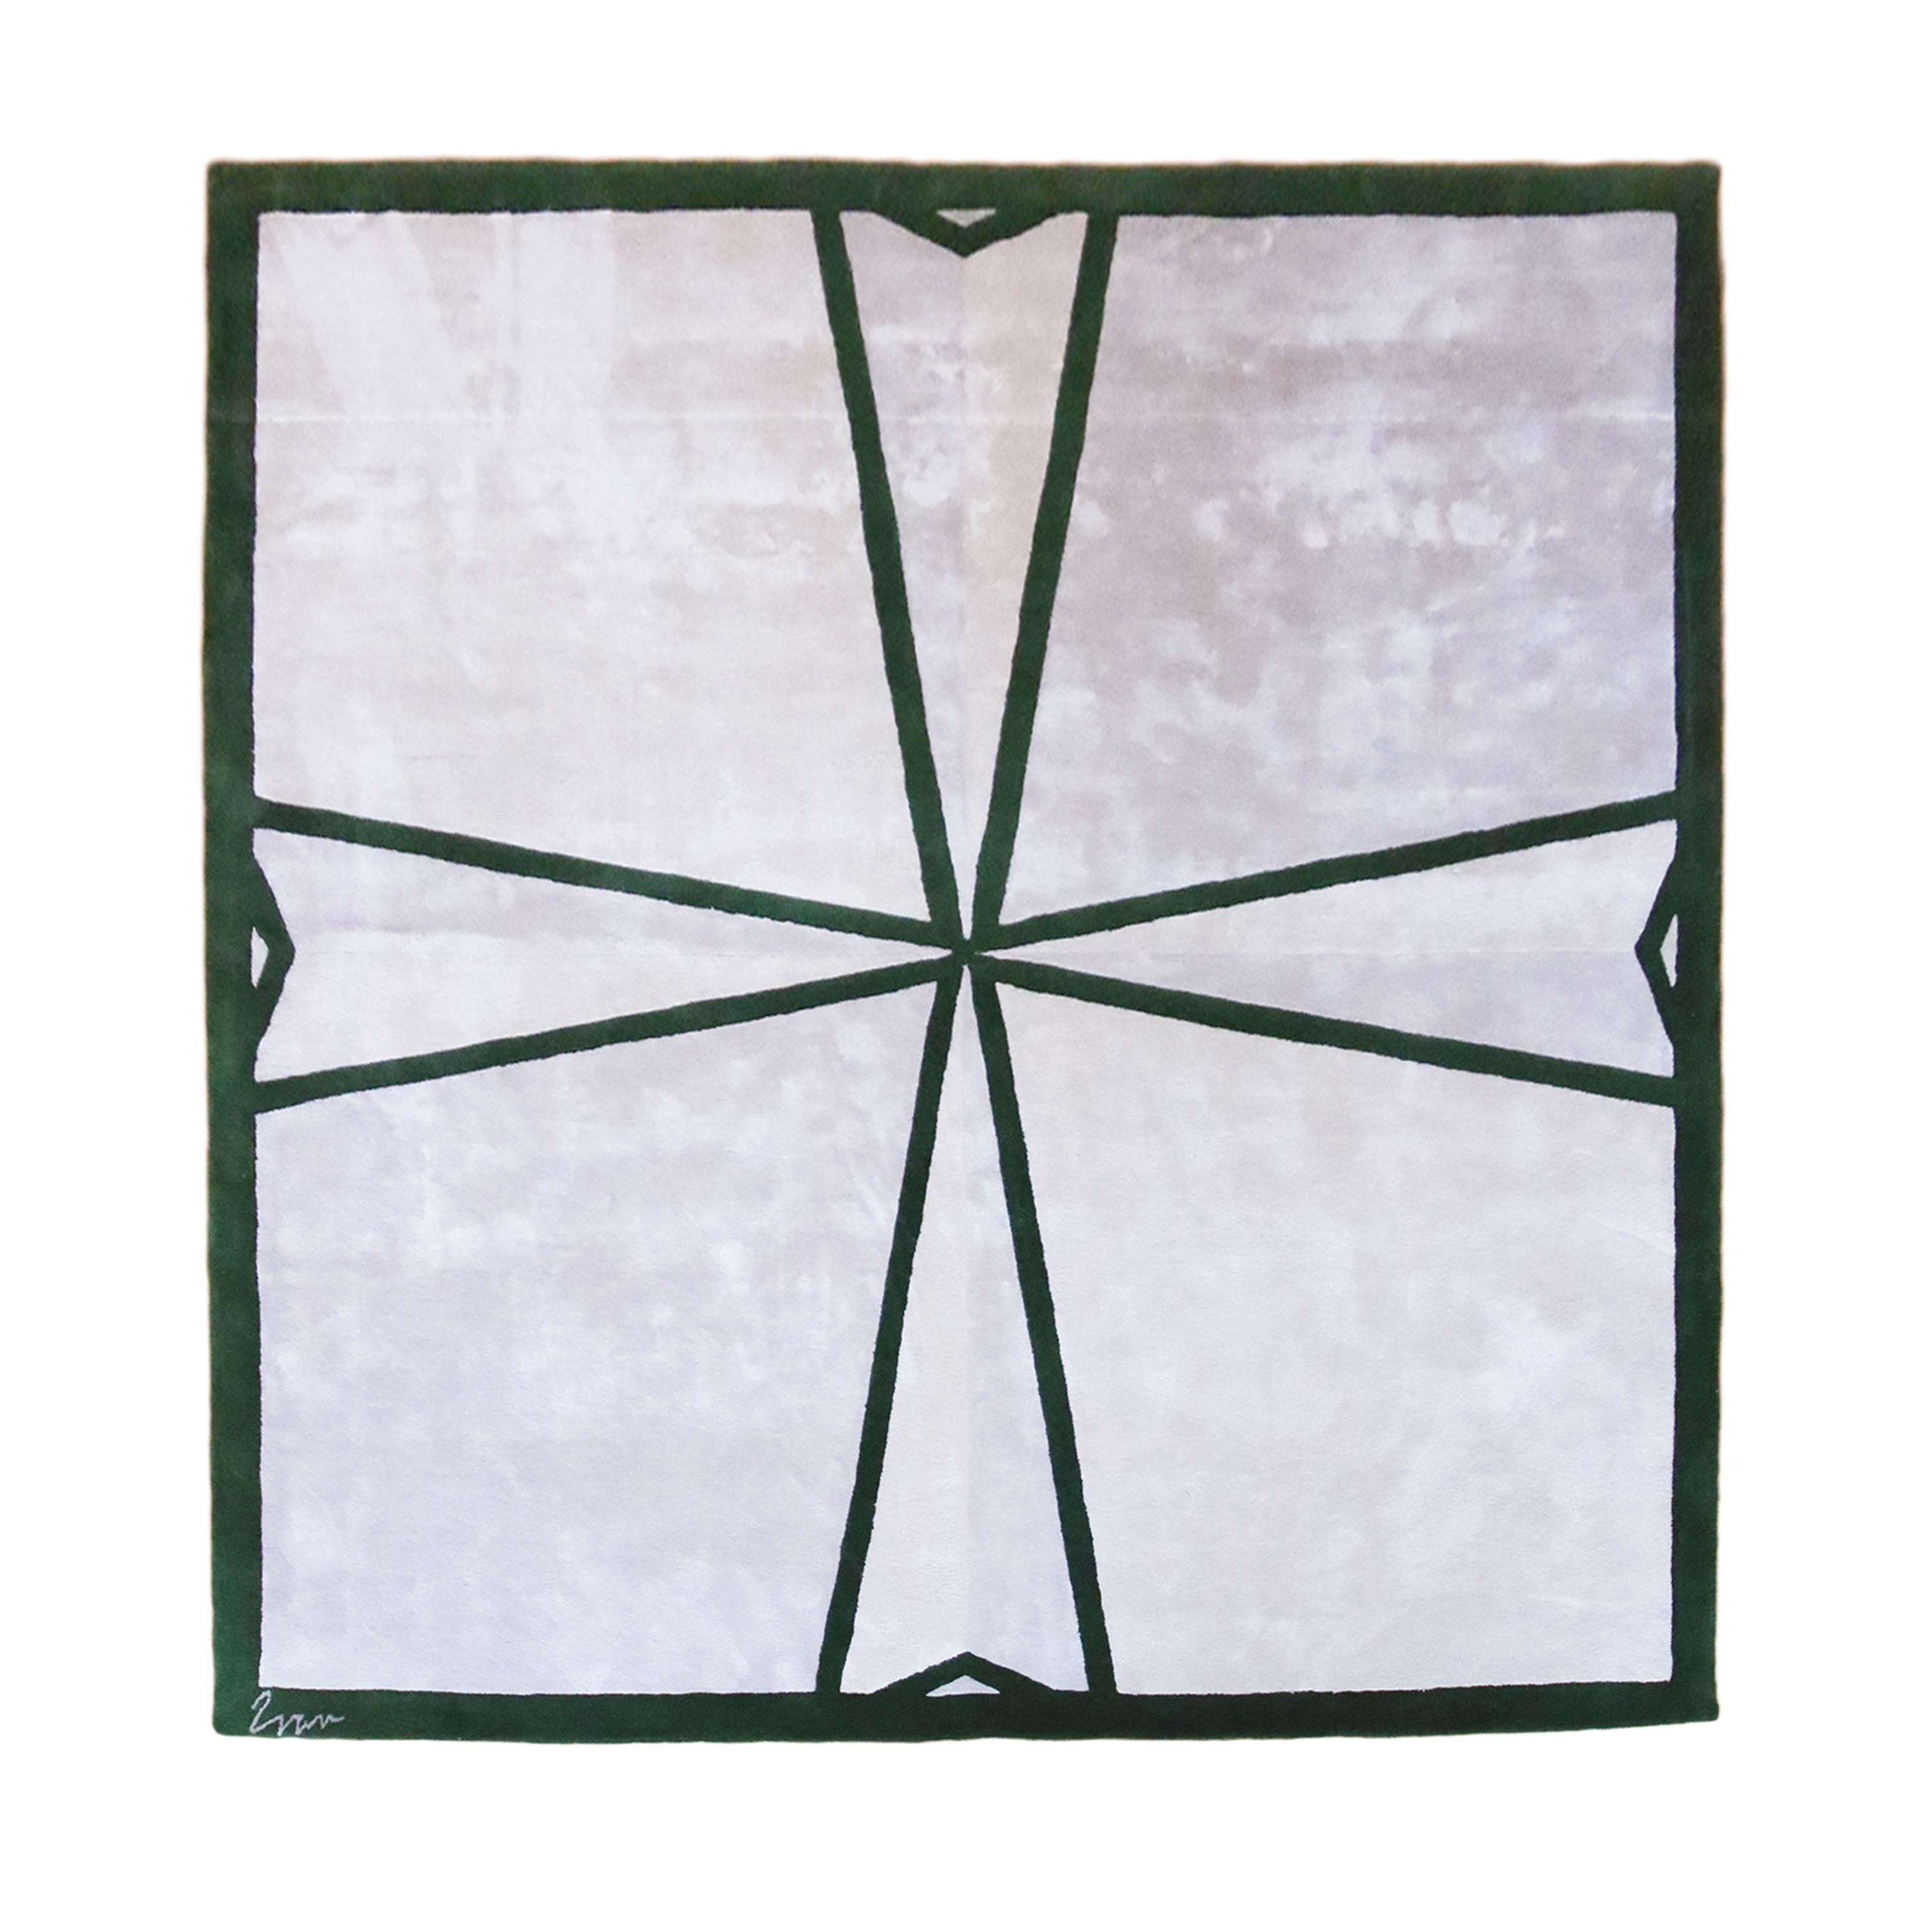 Hand-Carved Square Rug Green And Ivory, Contemporary Design, Hand-Tufted For Sale